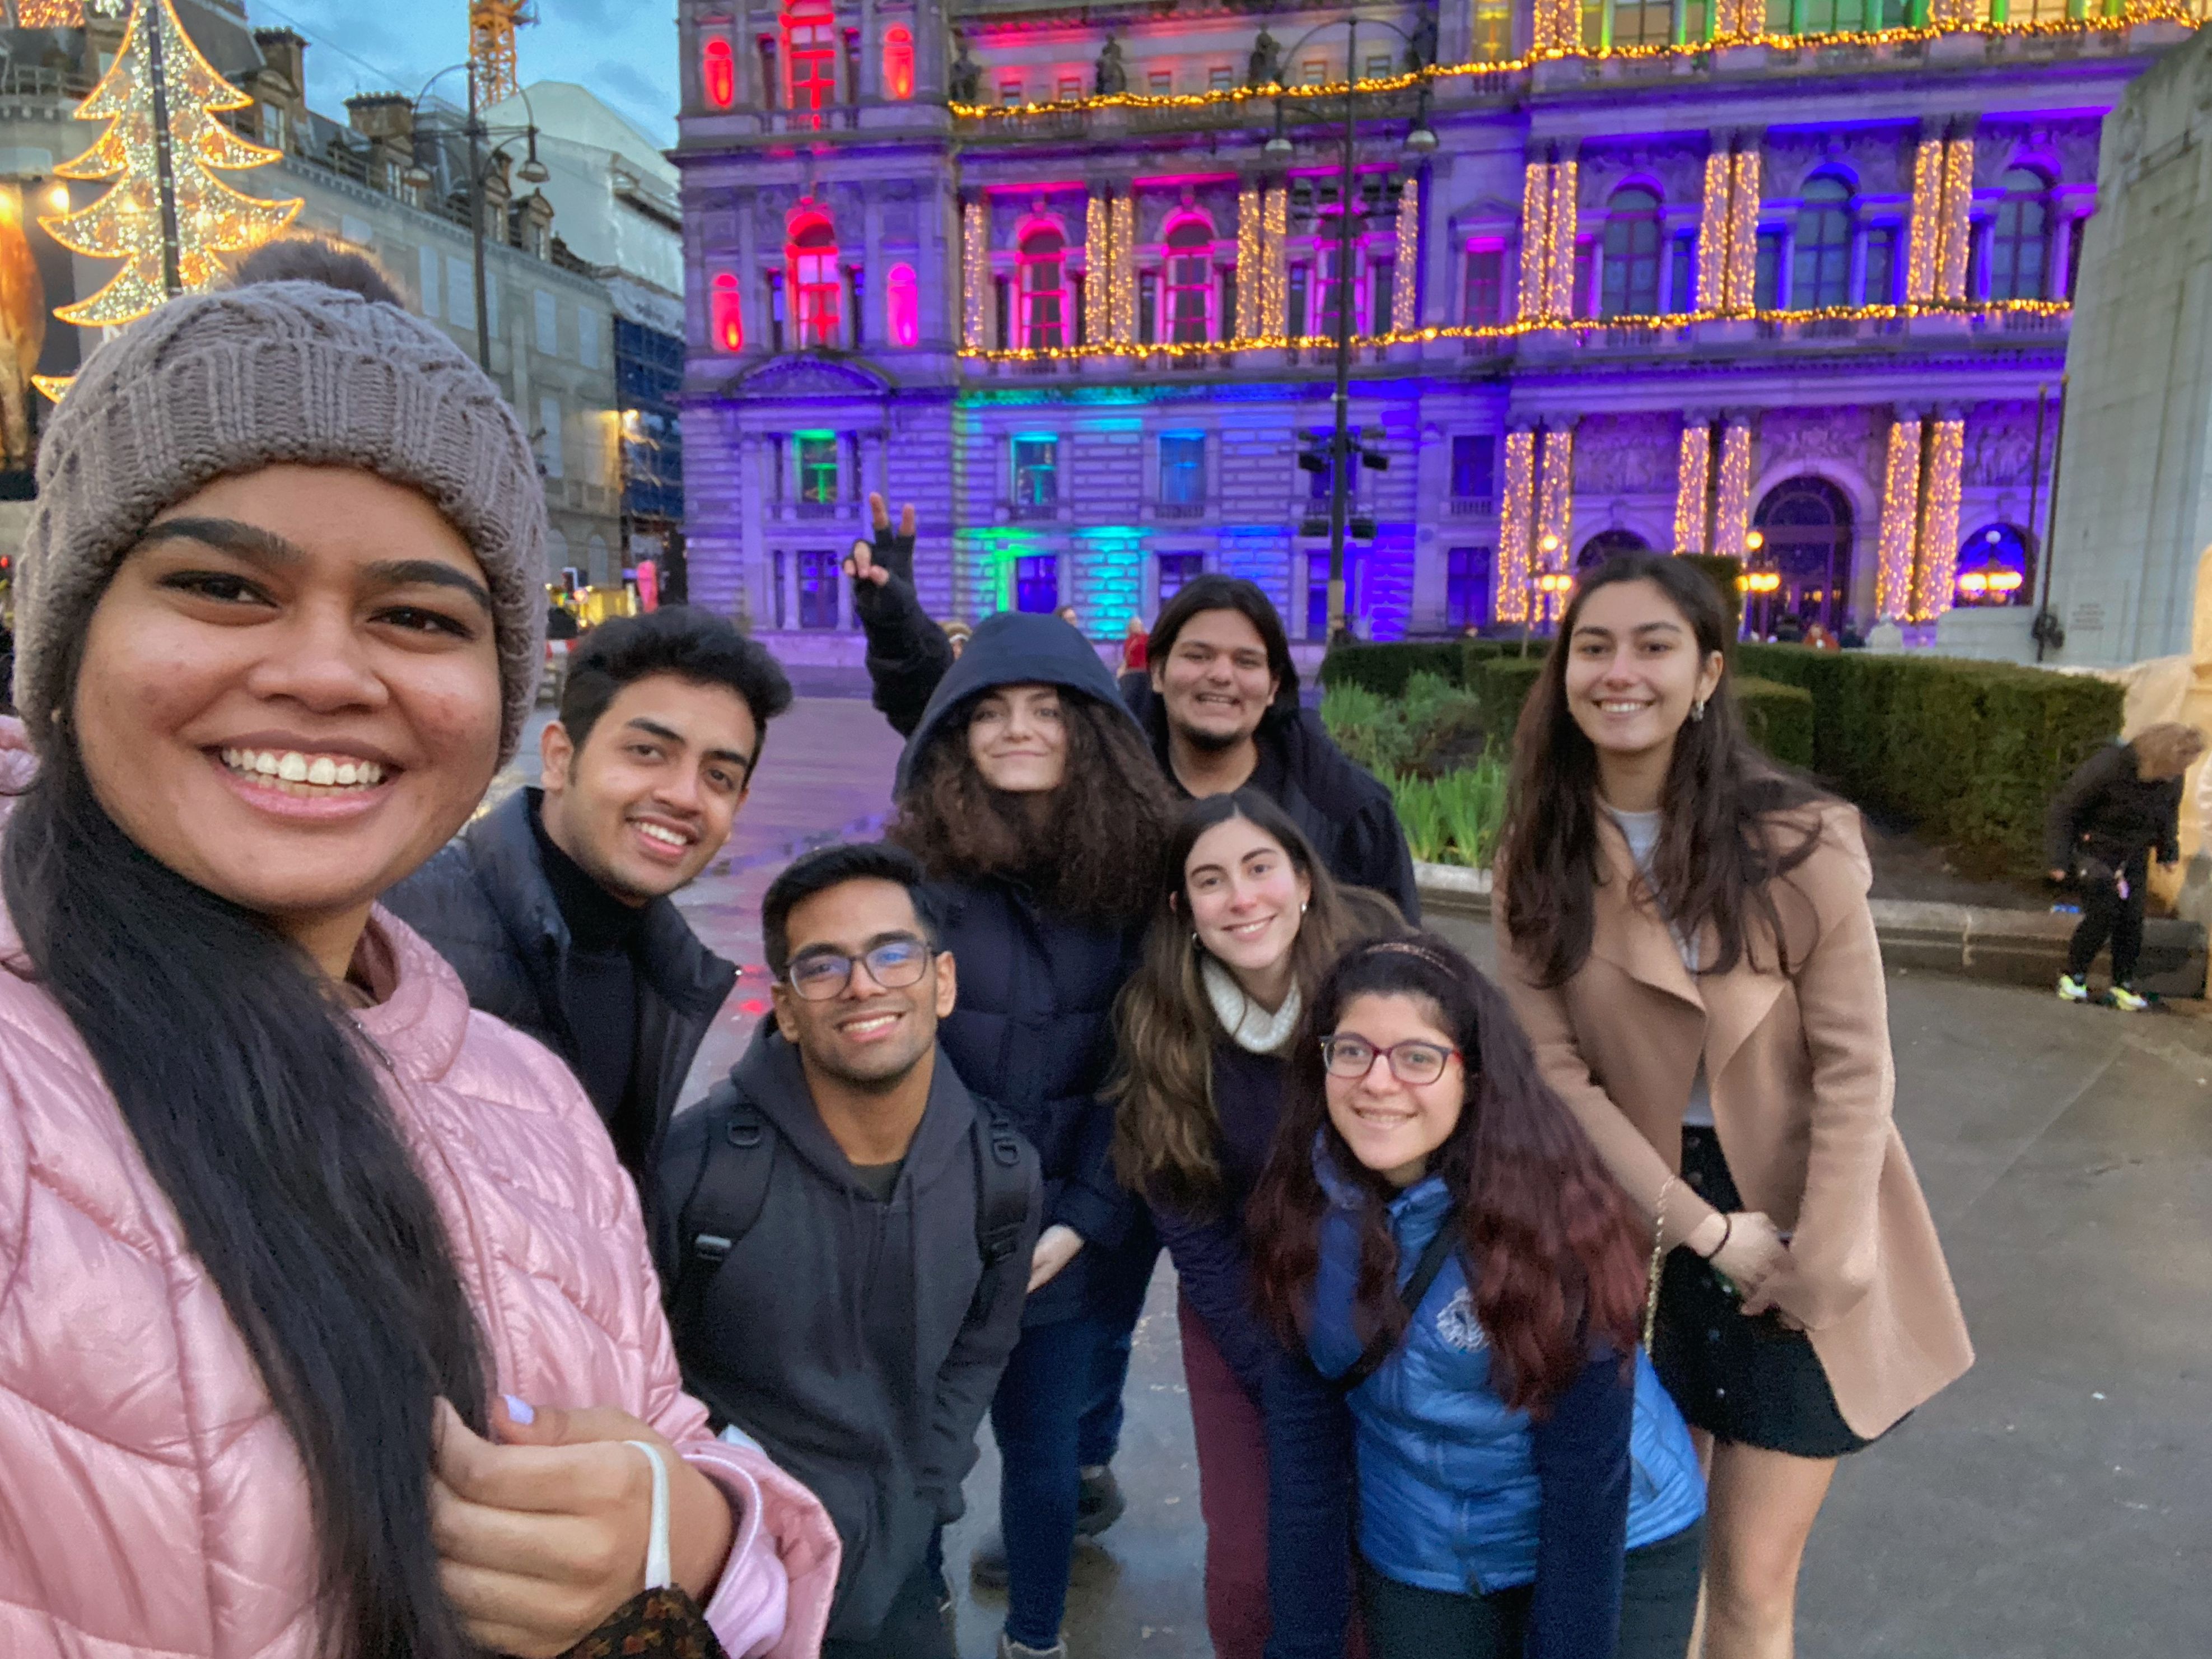 A group of friends stand together smiling in winter clothes. Rishabh is at the back making a peace sign. There is a building in the background which is lit in urple, blue, pink and yello and it looks festive.